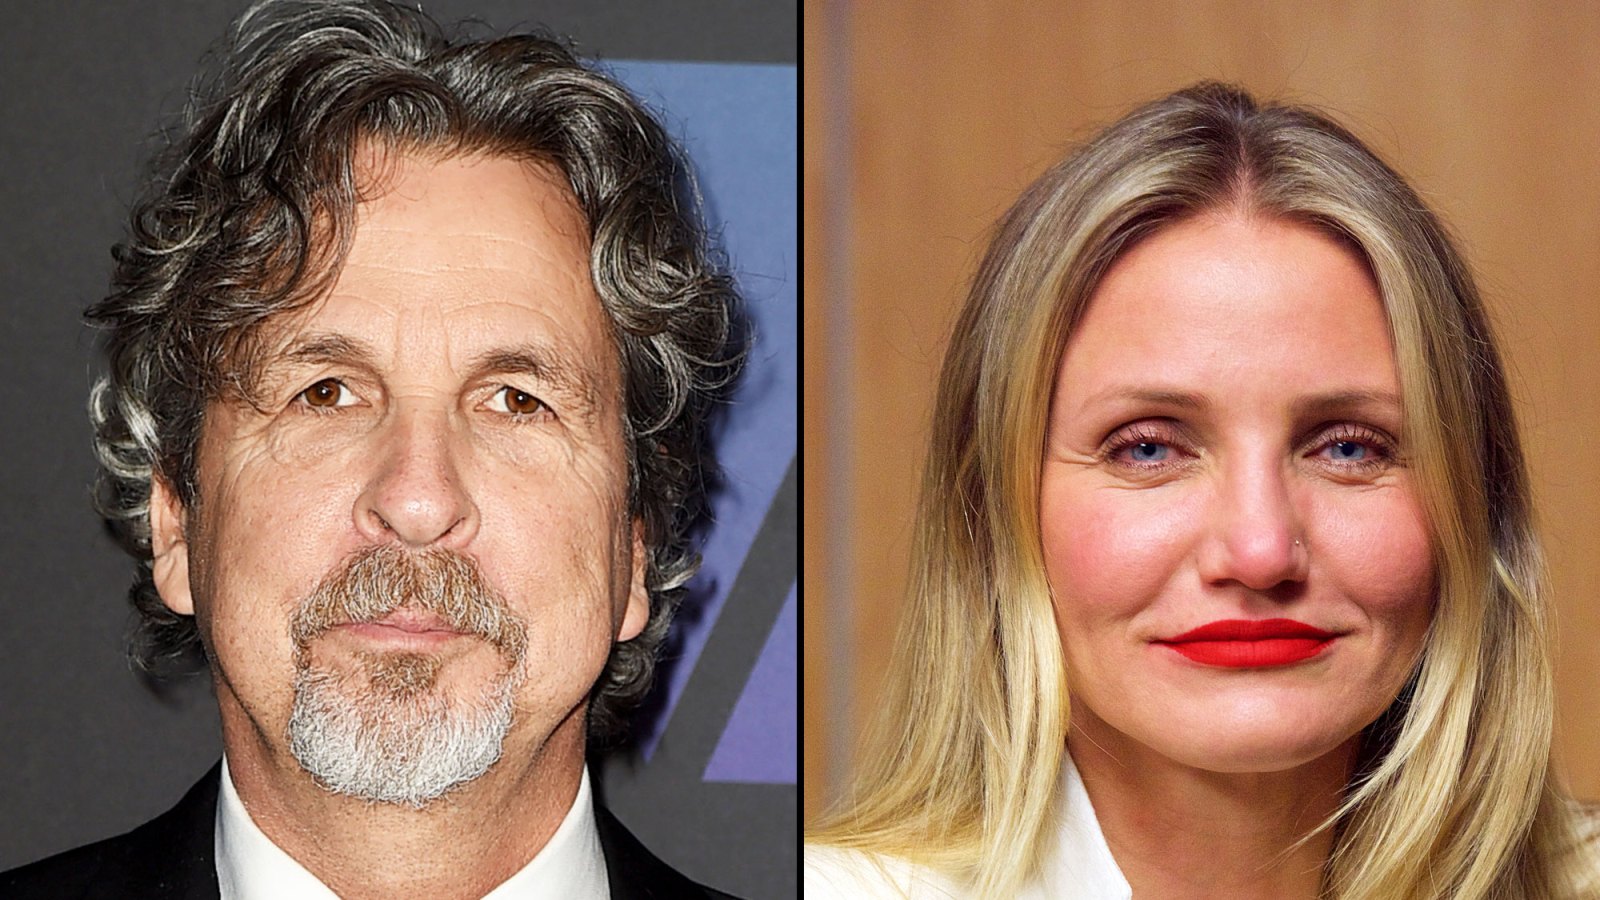 'Green Book' Director Peter Farrelly Apologizes for Flashing Cameron Diaz, Others Years Before Golden Globes Win